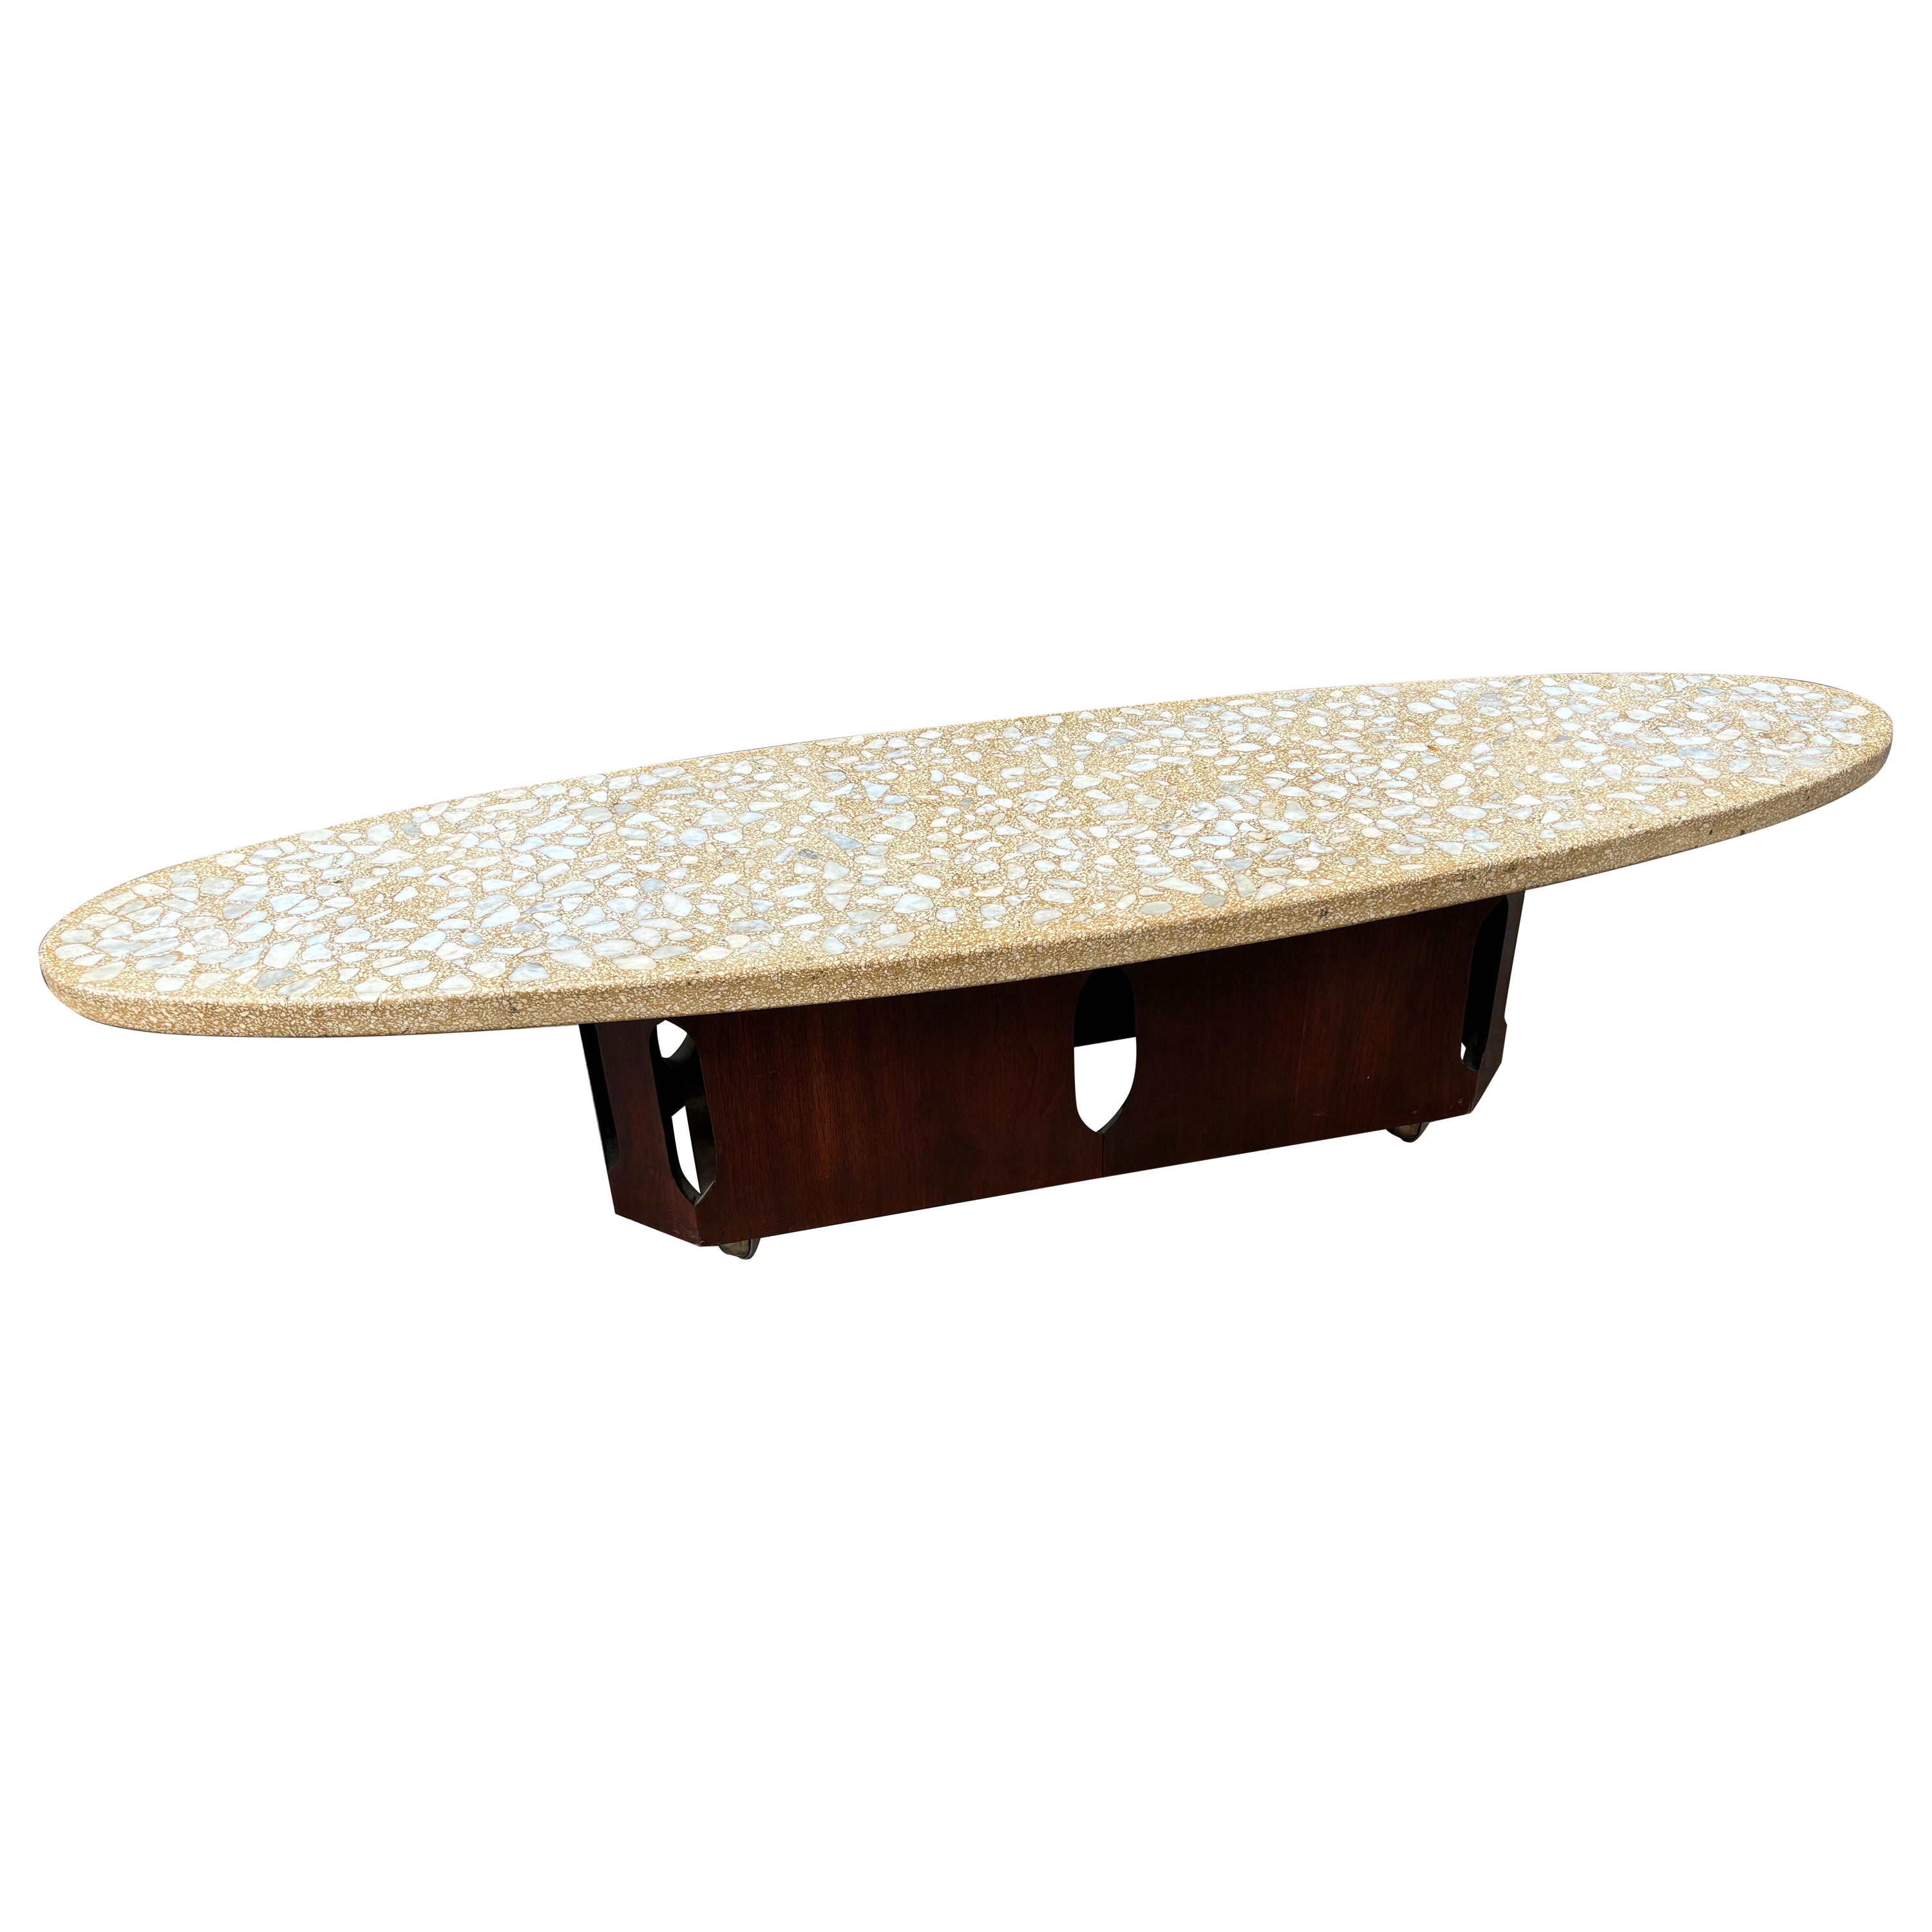 Harvy Probber Style Terrazzo and Stone Inlay Surfboard Coffee Table For Sale